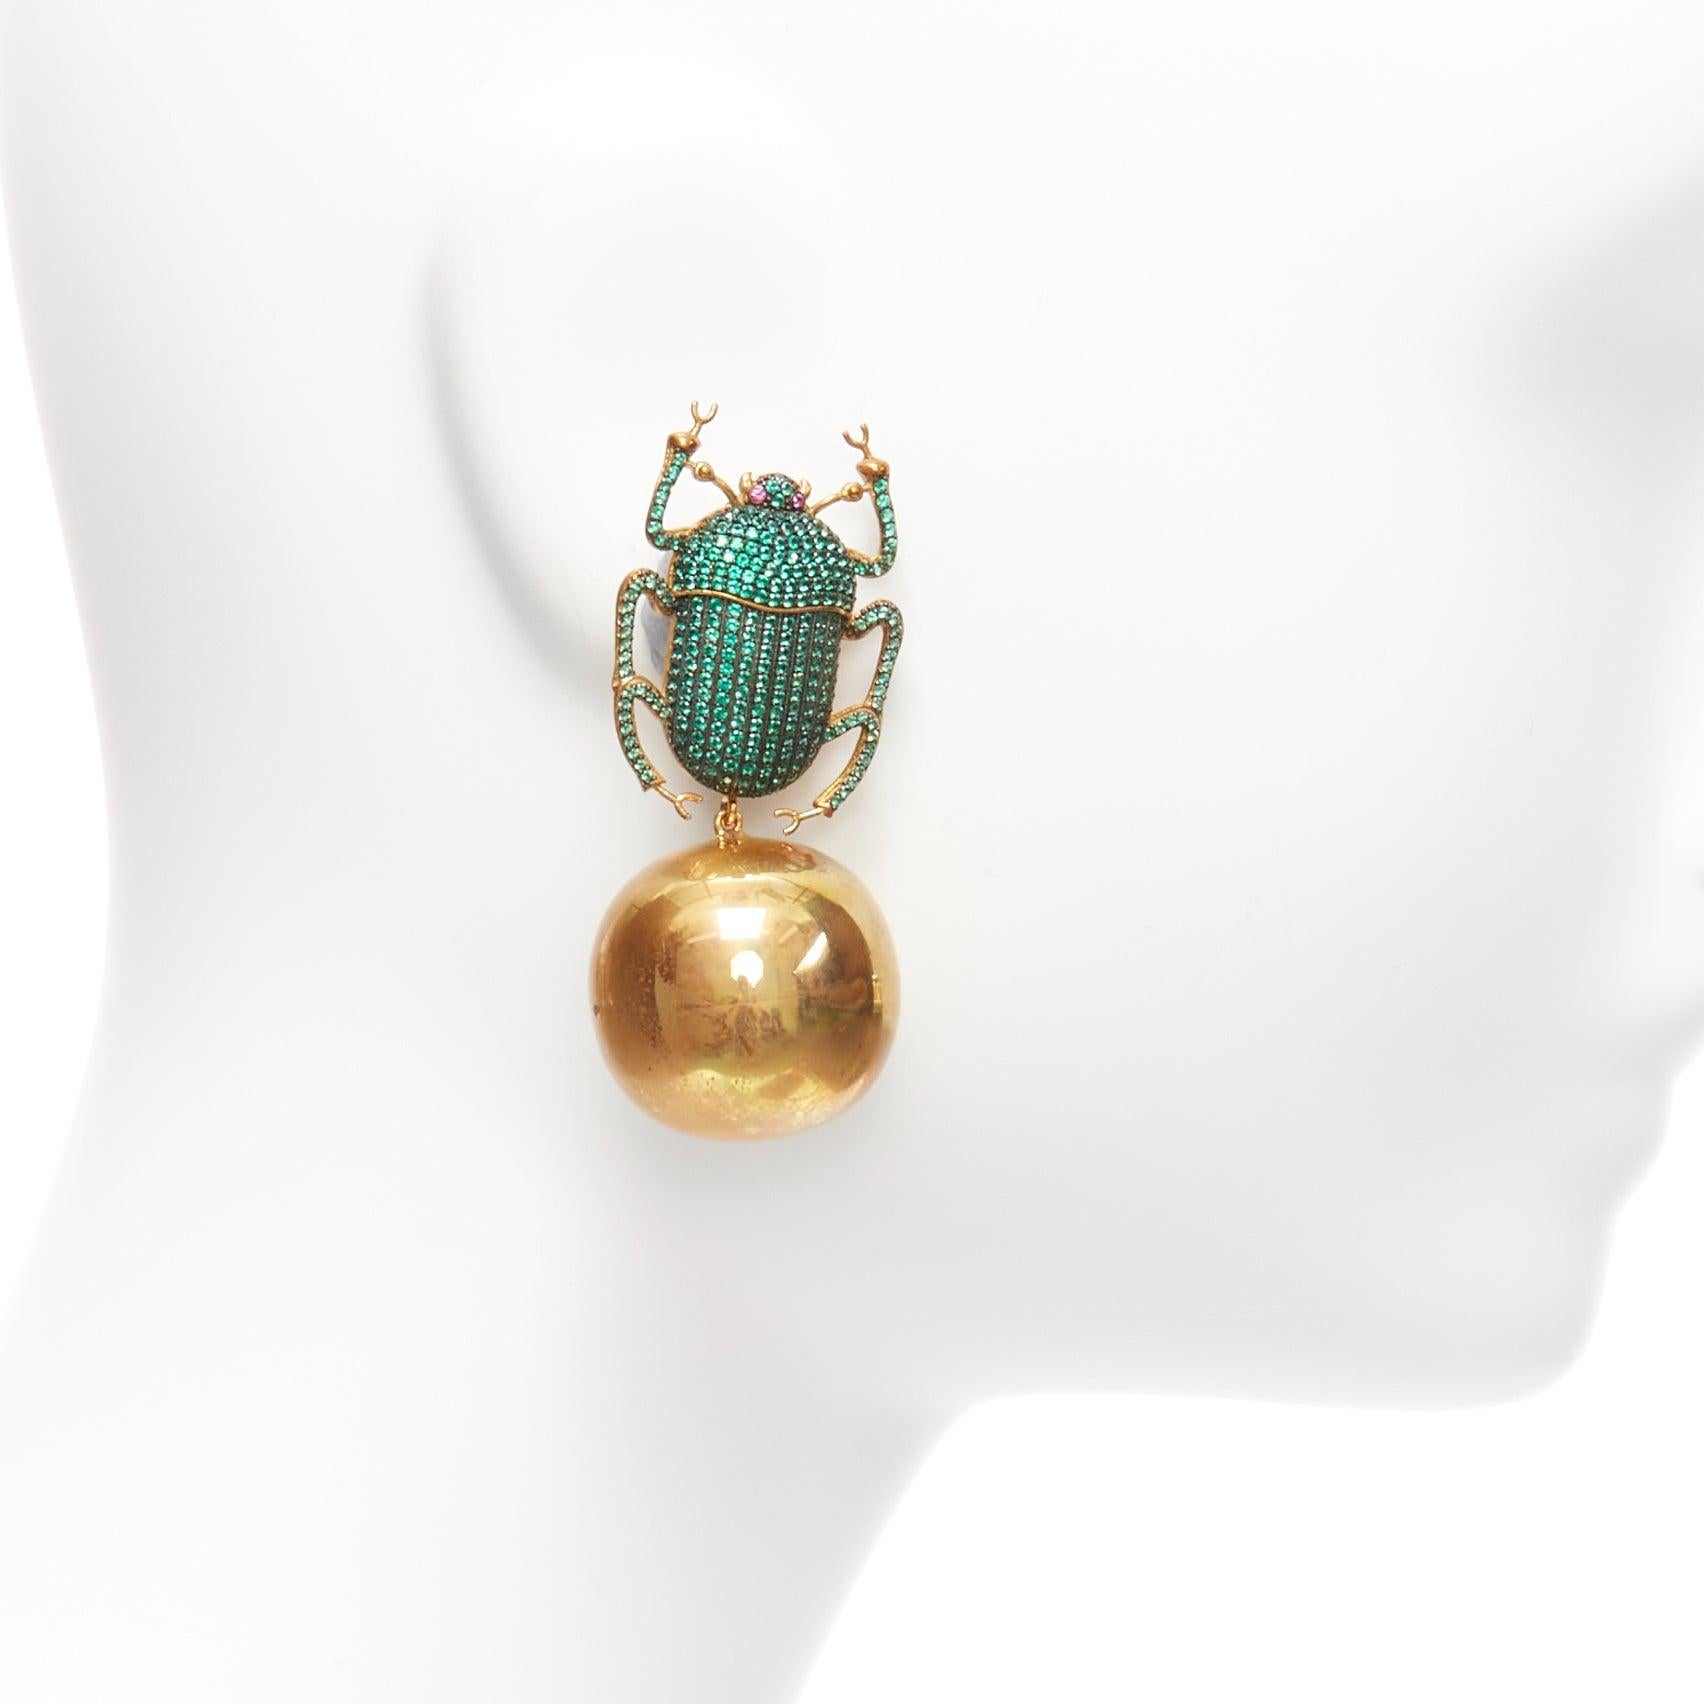 BEGUM KHAN green emerald bug 9K yellow gold ball dangling clip on earring
Reference: LNKO/A02206
Brand: Begum Khan
Material: Metal
Color: Gold, Green
Pattern: Solid
Closure: Clip On
Lining: Gold Metal
Extra Details: Logo at